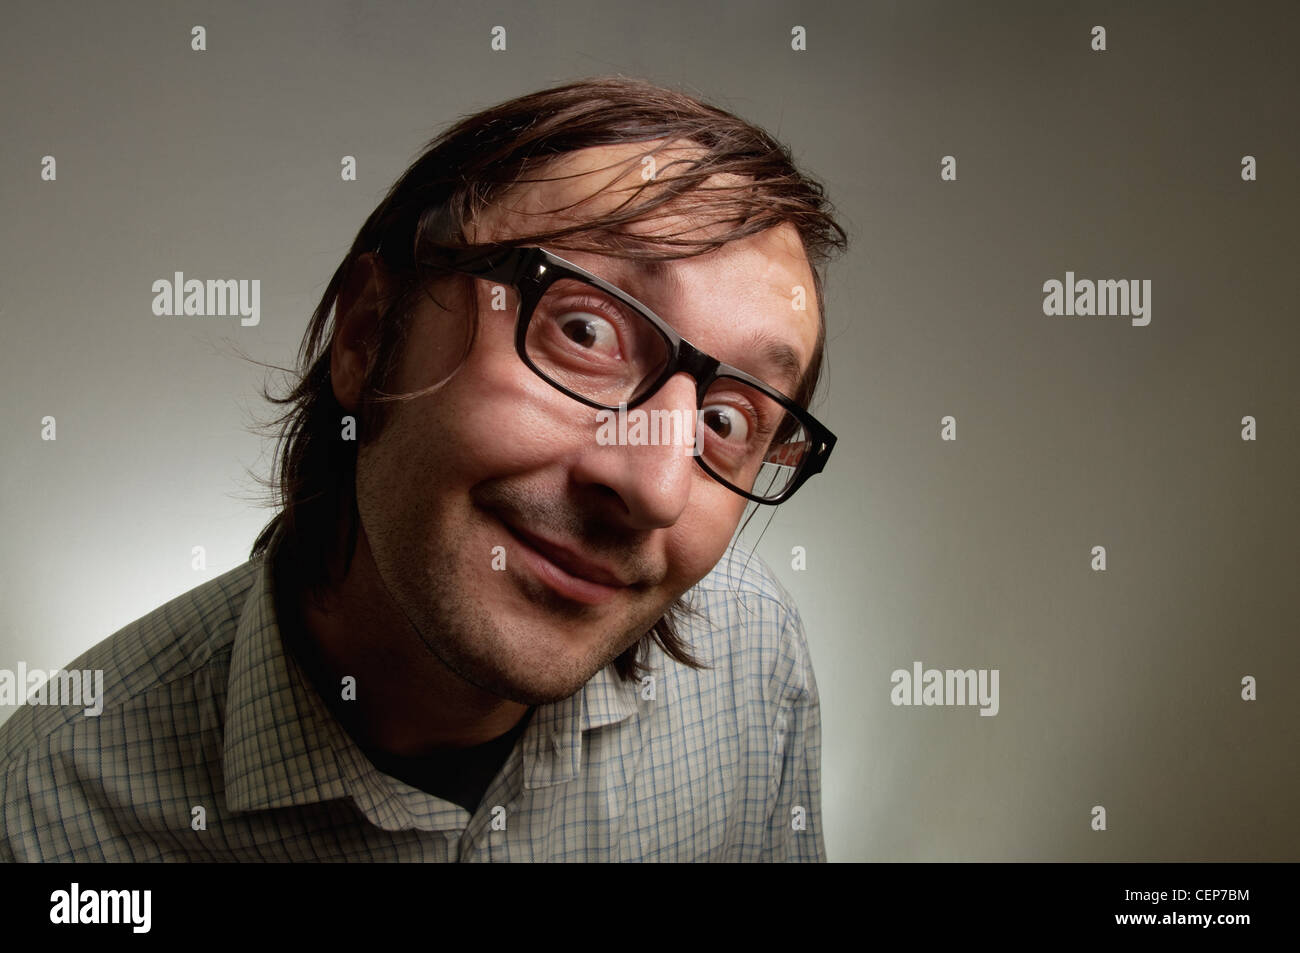 Big head nerd male close up portrait, this image is a humorous concept photo. Stock Photo